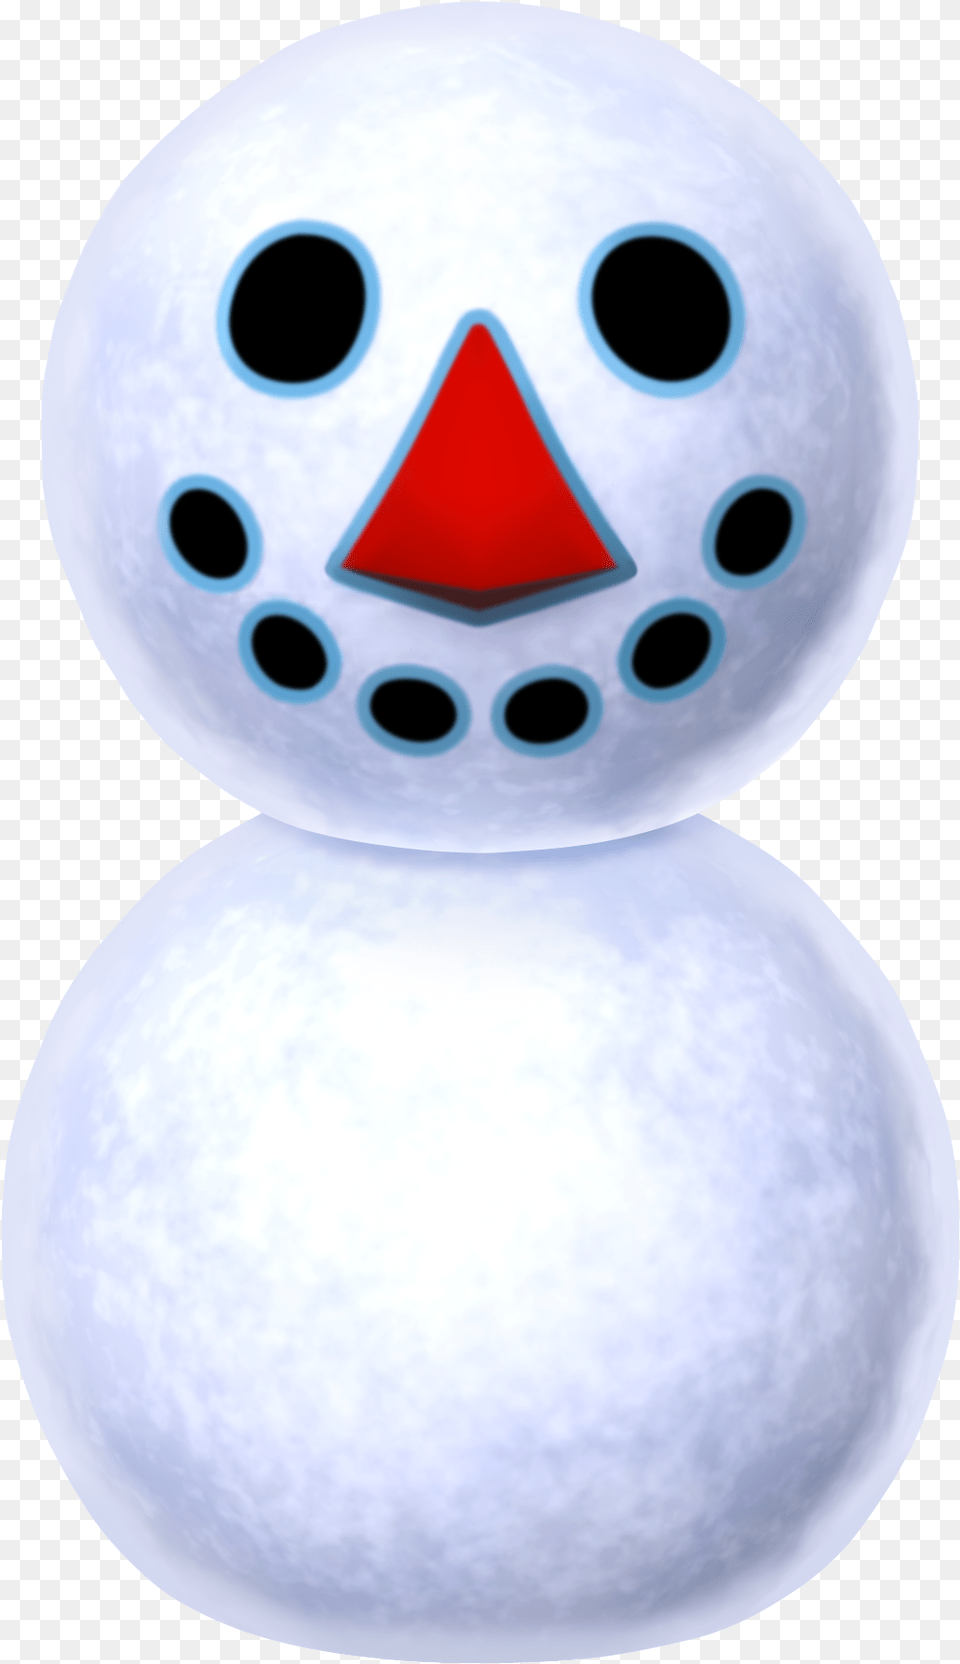 Download Hd New Leaf Images Snowman Wallpaper And Animal Crossing New Leaf Snowman, Nature, Outdoors, Winter, Snow Free Transparent Png